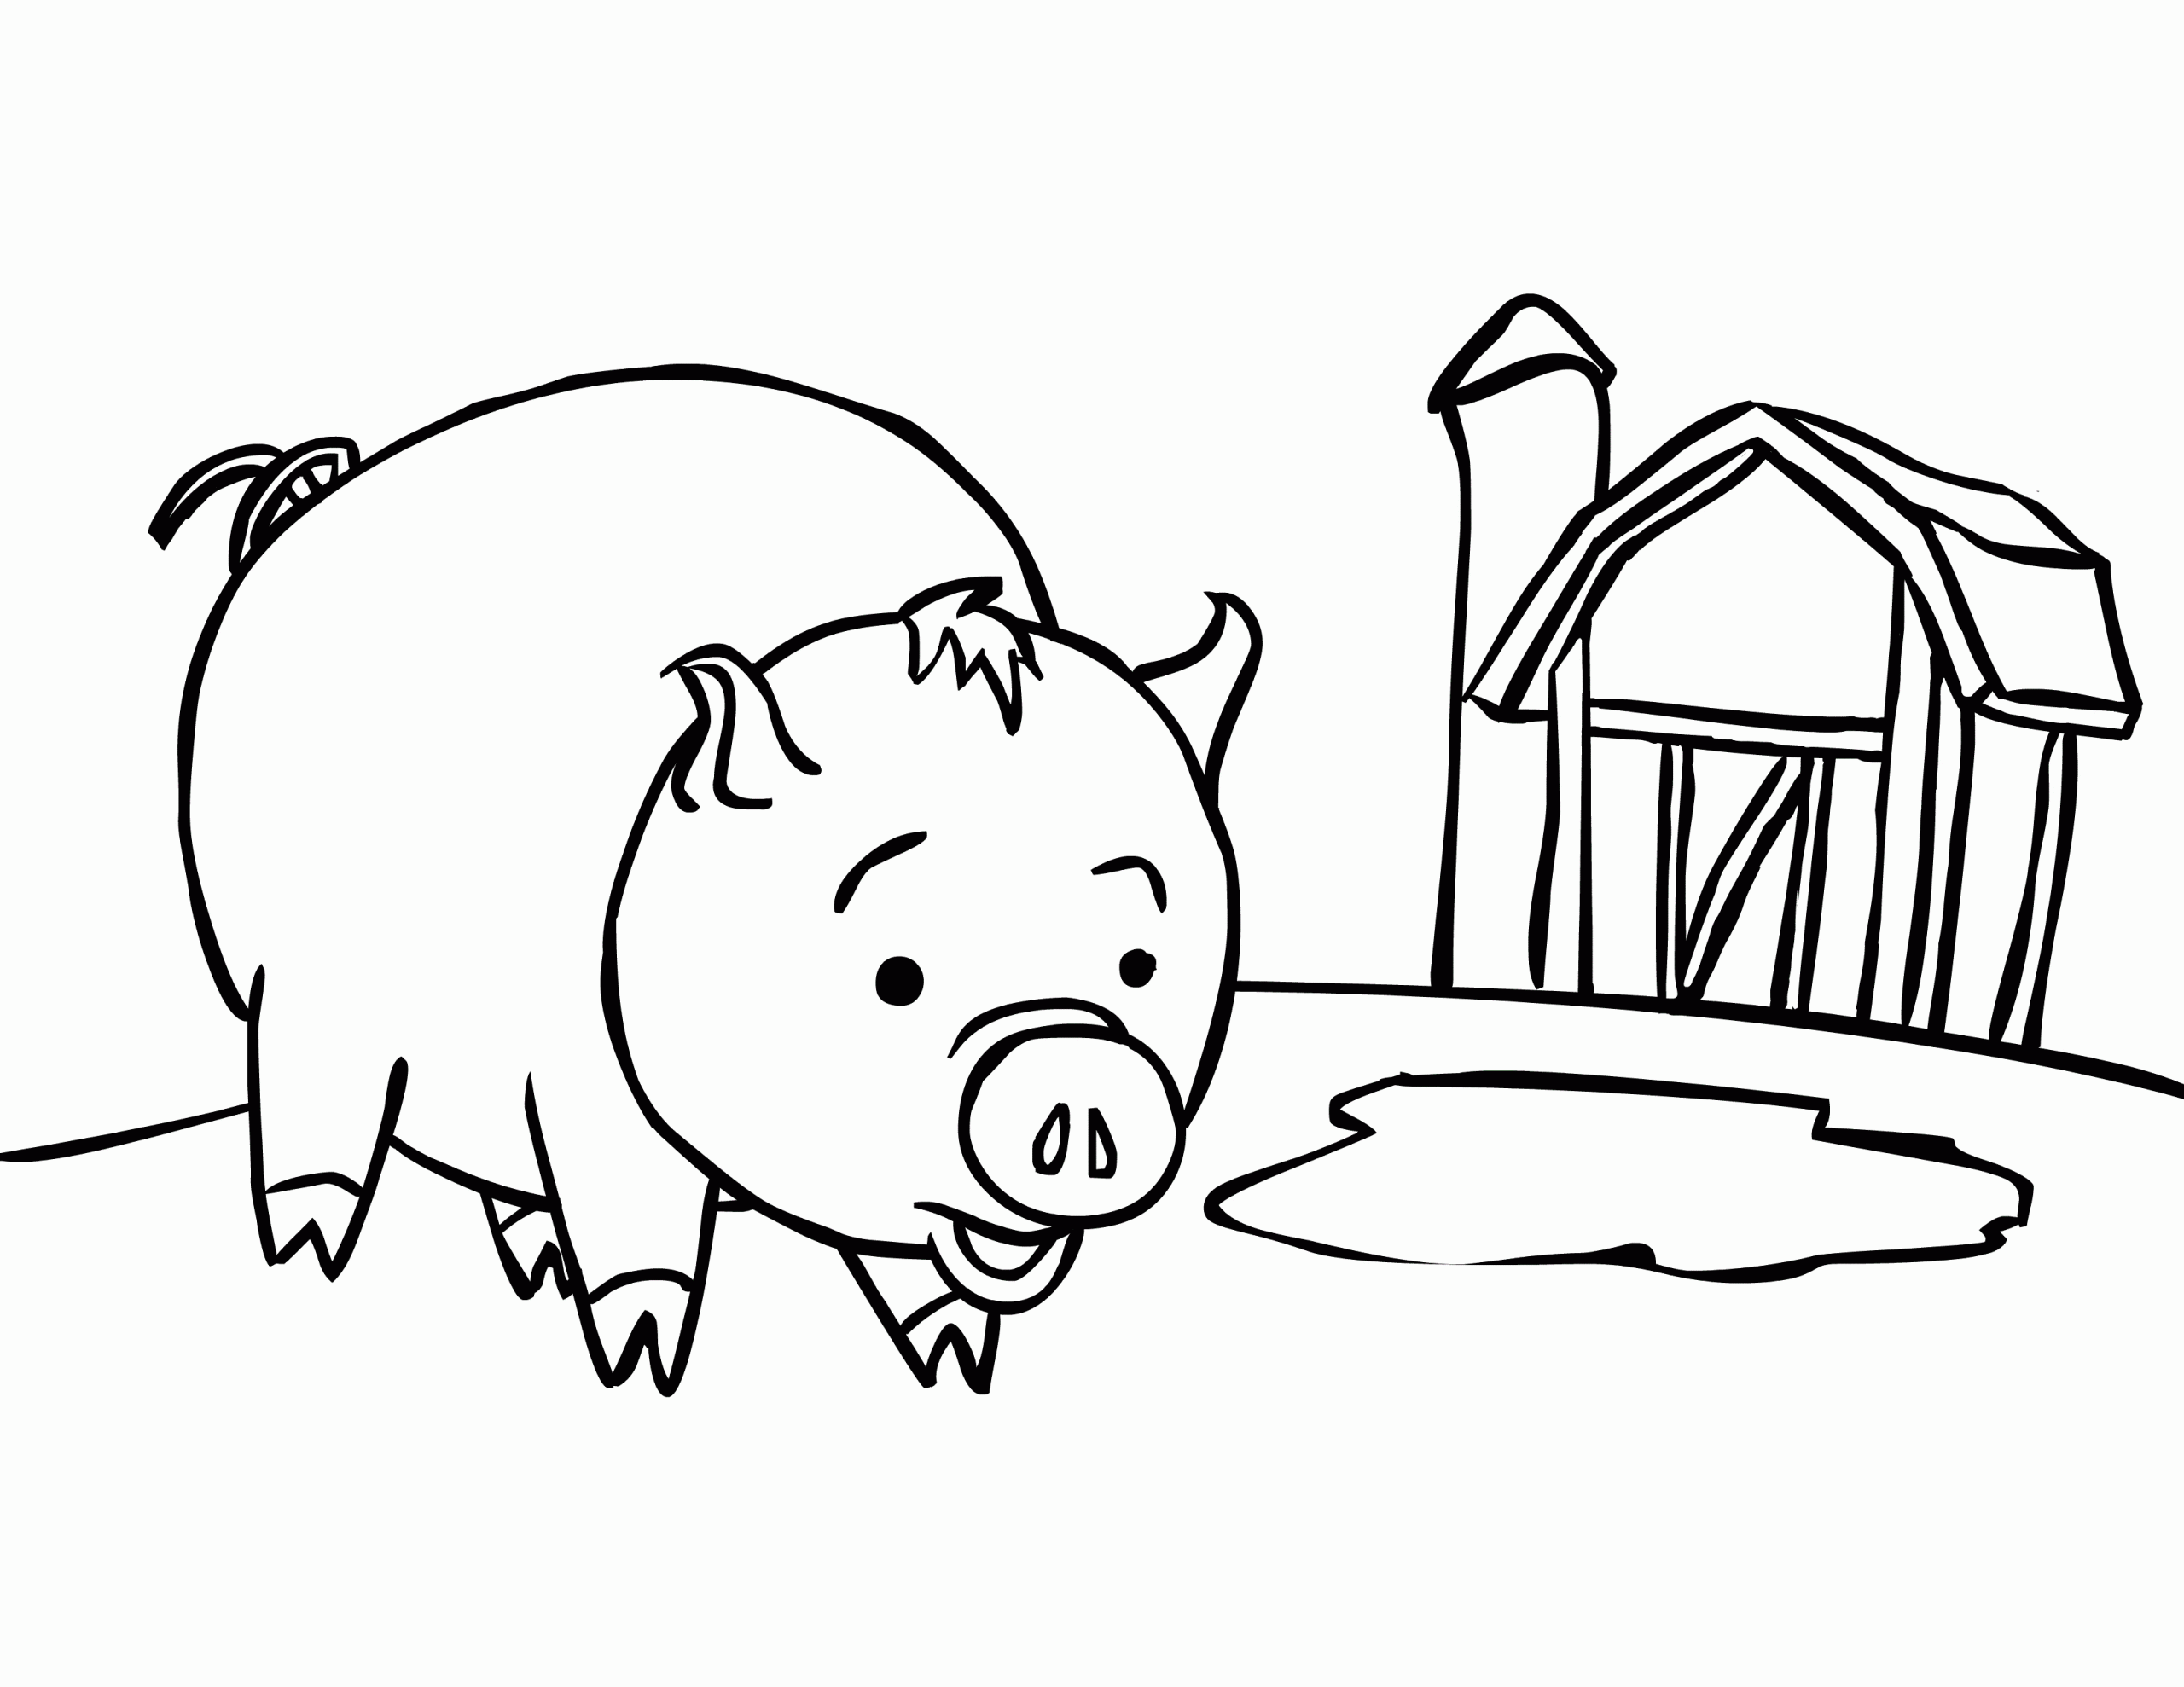 Pig Coloring Pages For Adults
 Free Printable Pig Coloring Pages For Kids